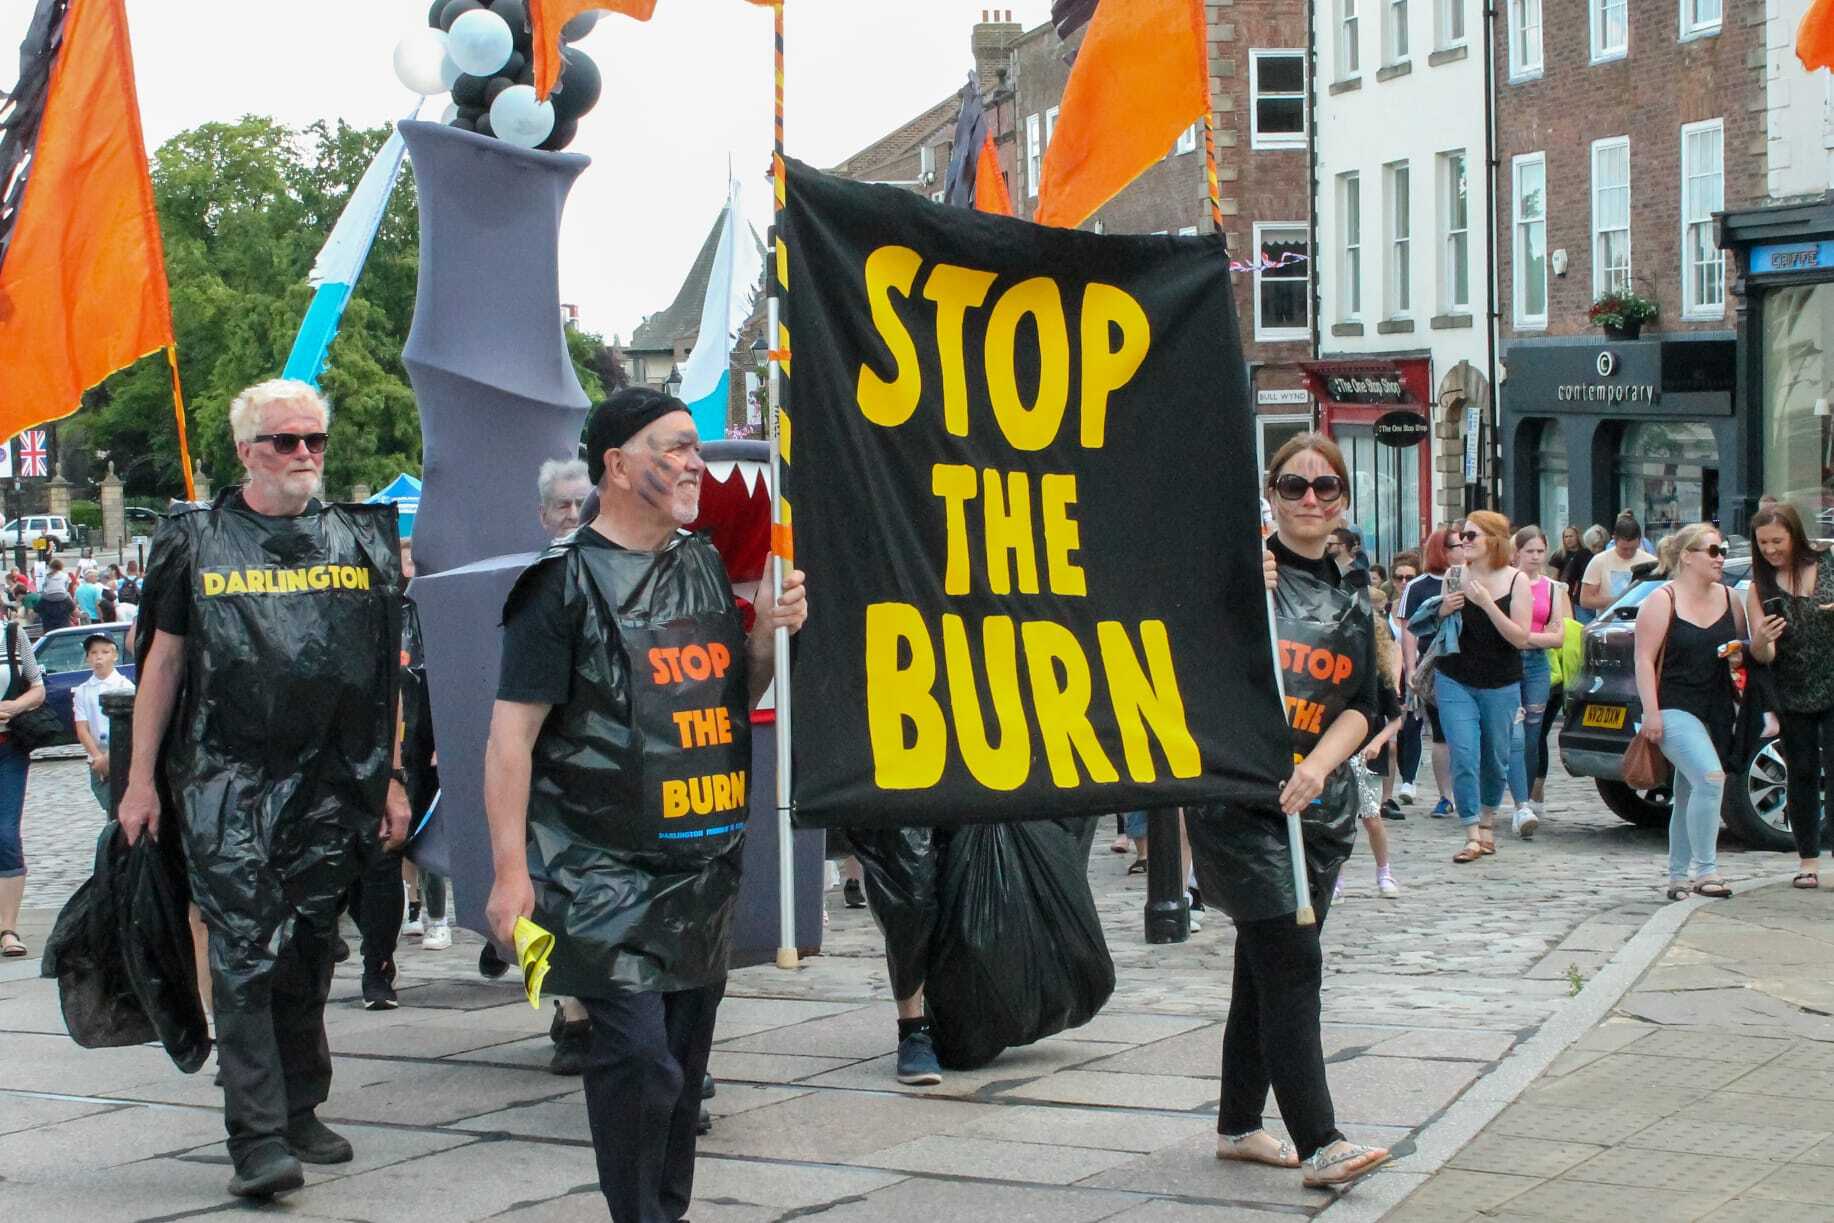 A group of people at a carnival parade carrying a model smoking incinerator and a banner saying "Stop the burn"